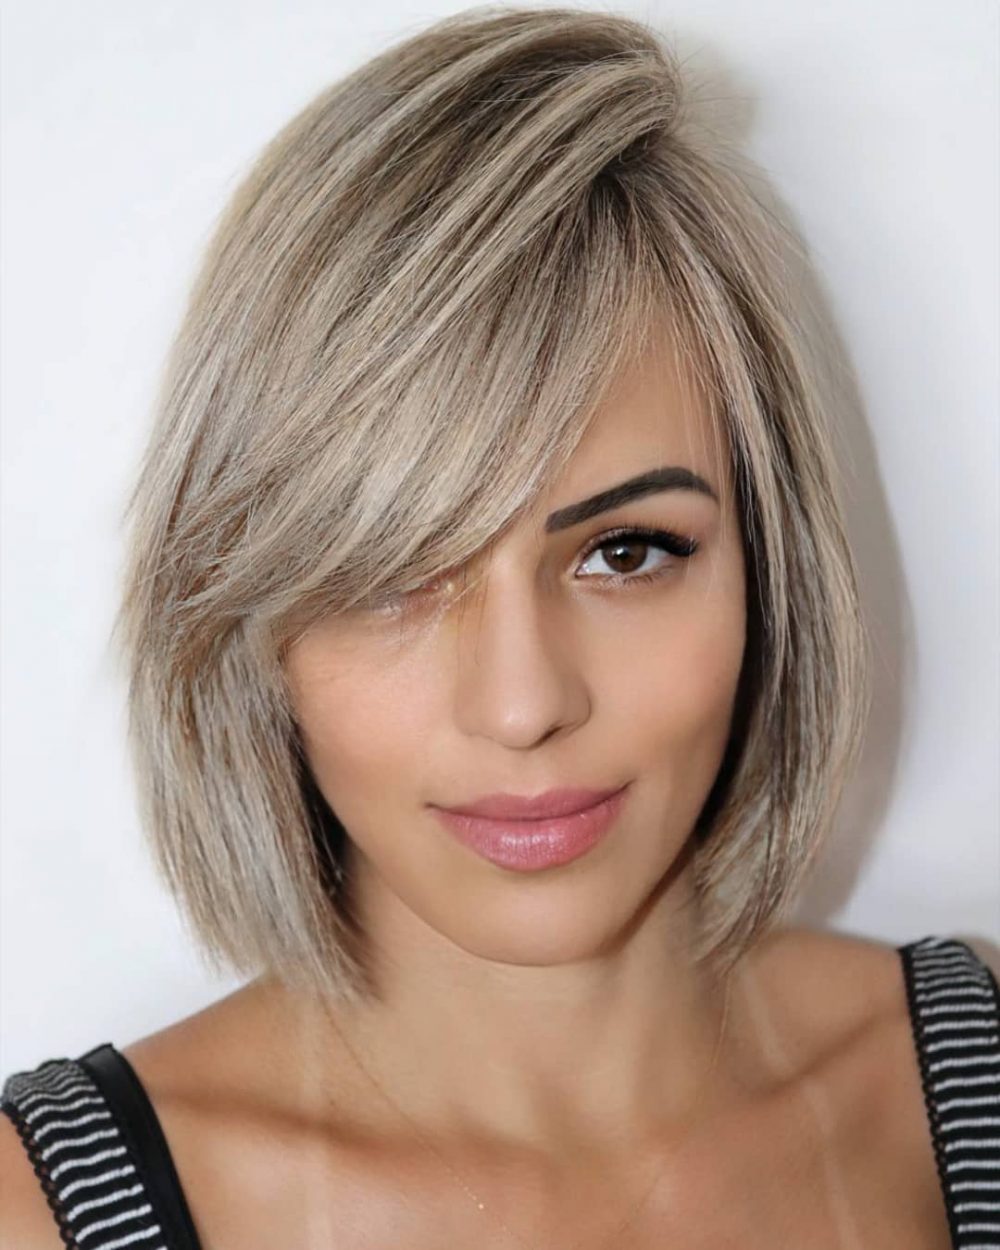 21 Side Bangs You Should See